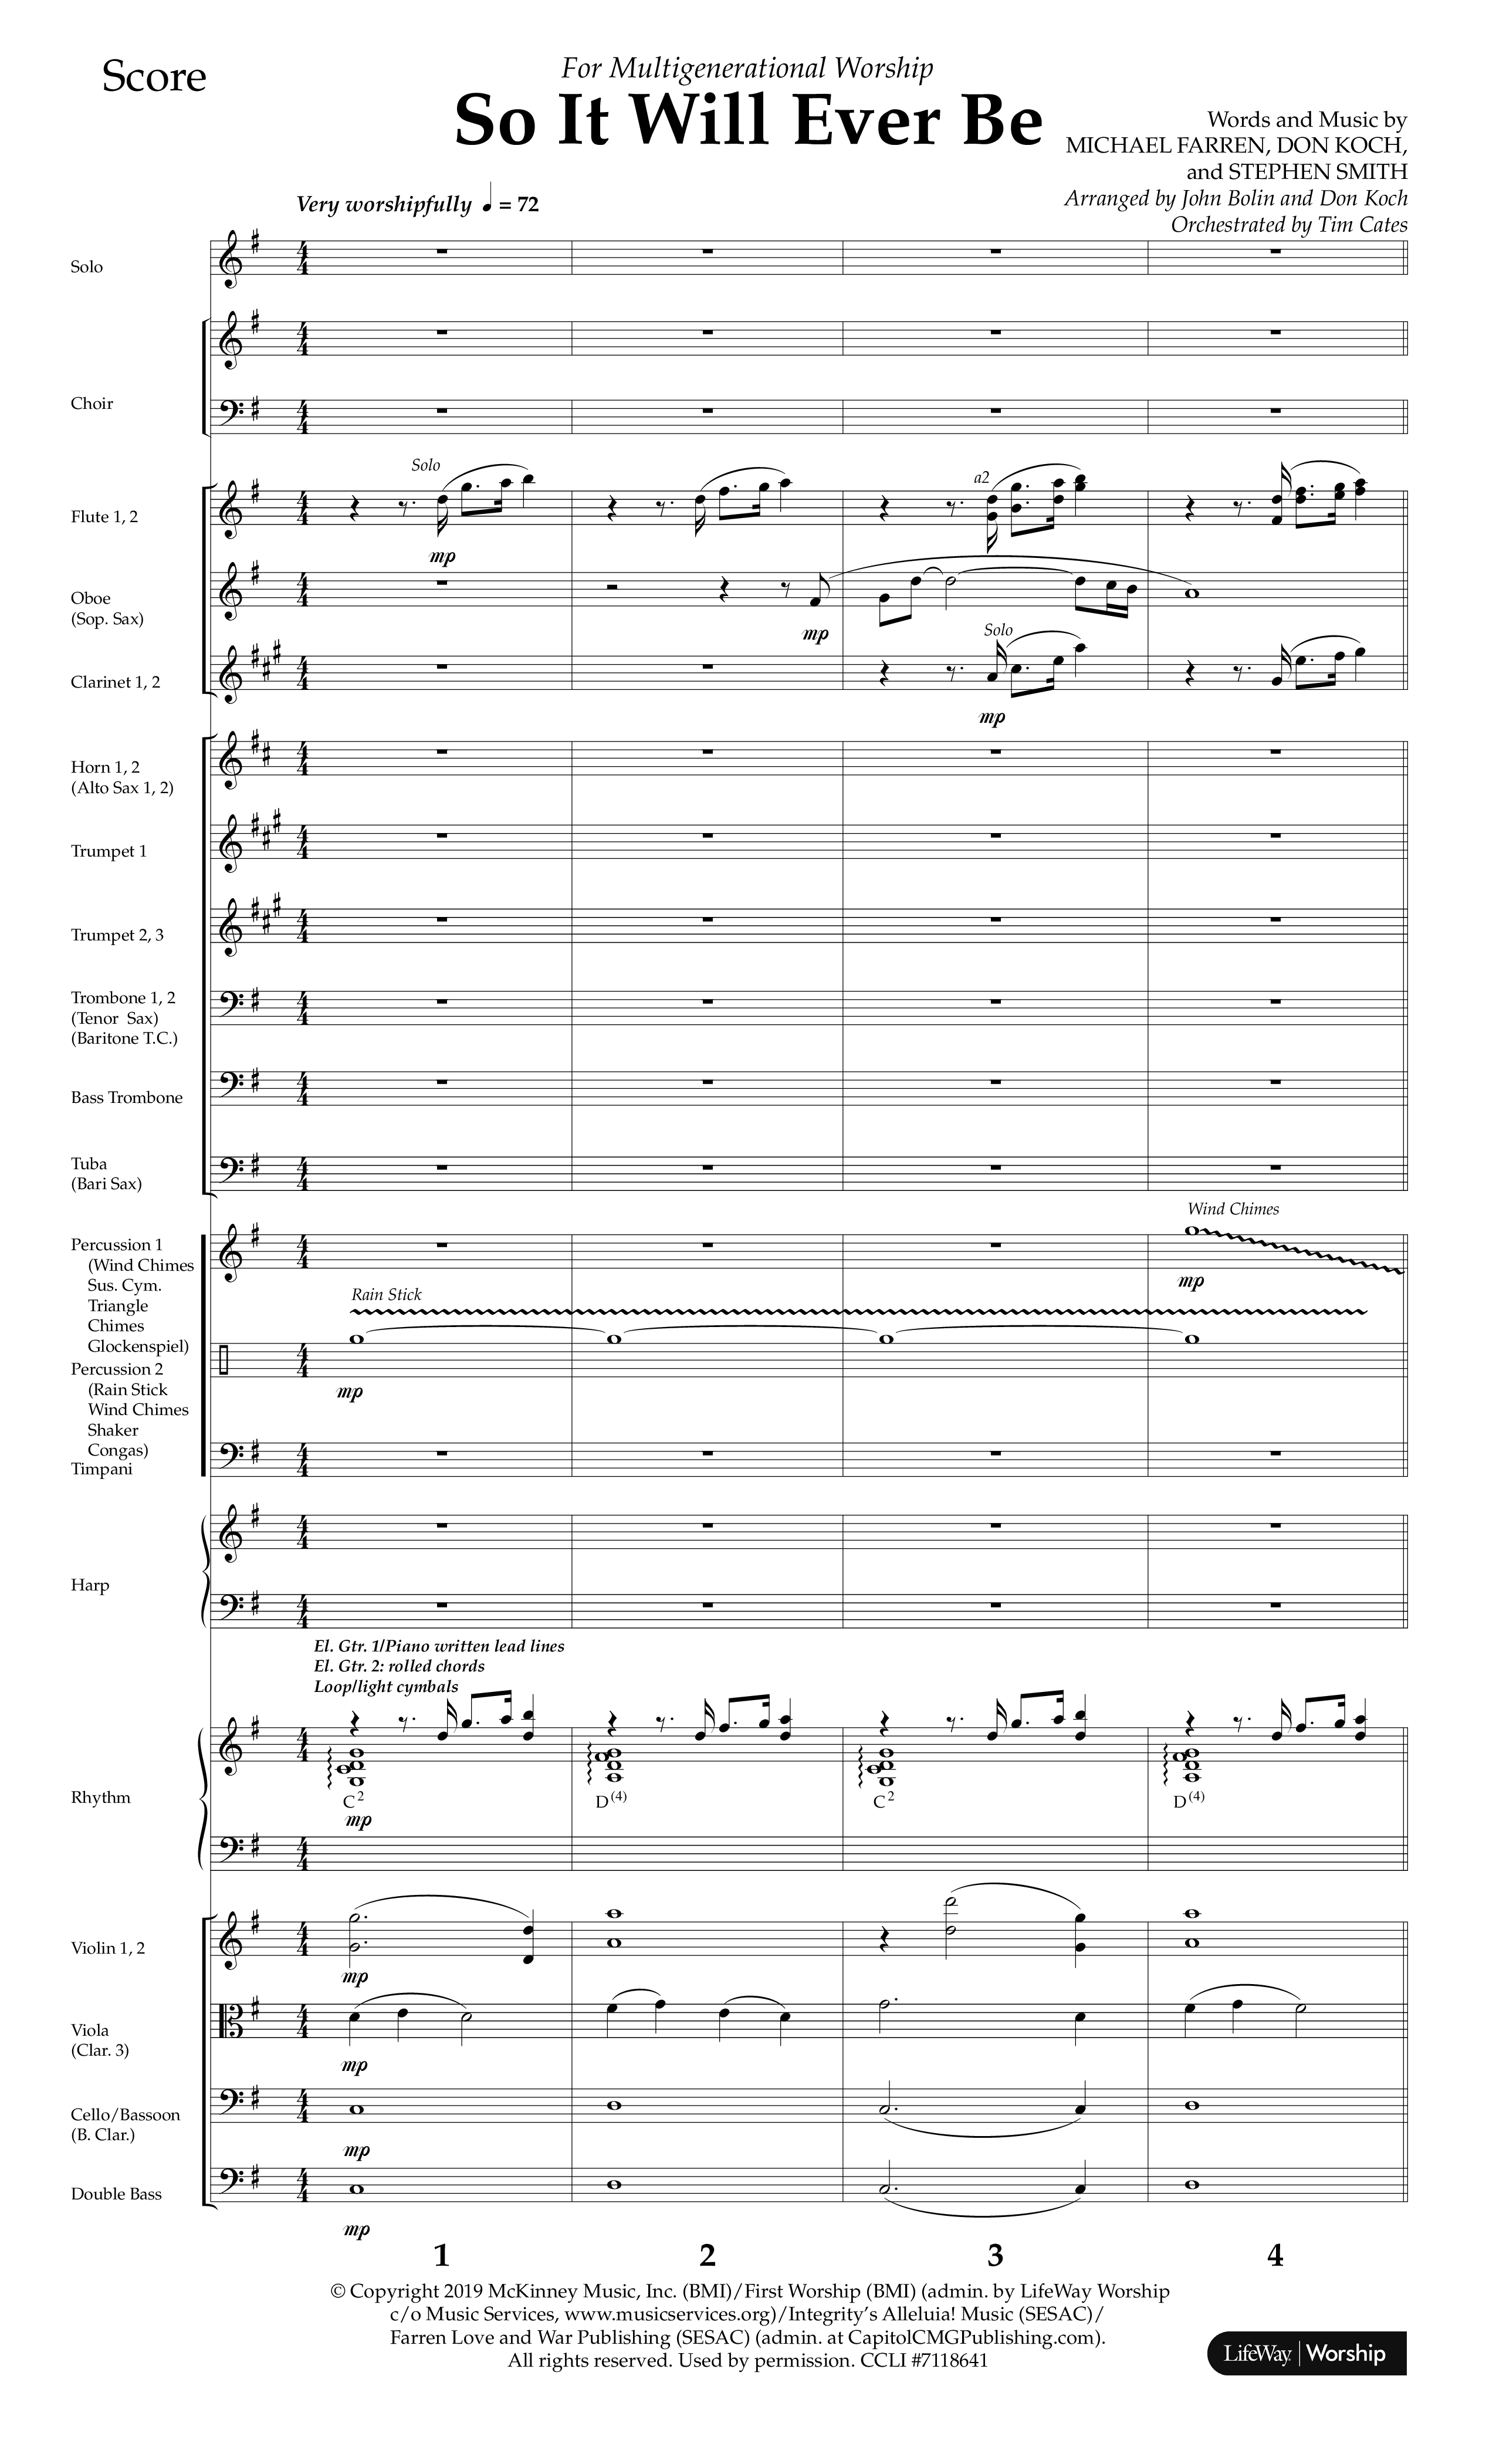 So It Will Ever Be (Choral Anthem SATB) Conductor's Score (Lifeway Choral / Arr. John Bolin / Arr. Don Koch / Orch. Tim Cates)